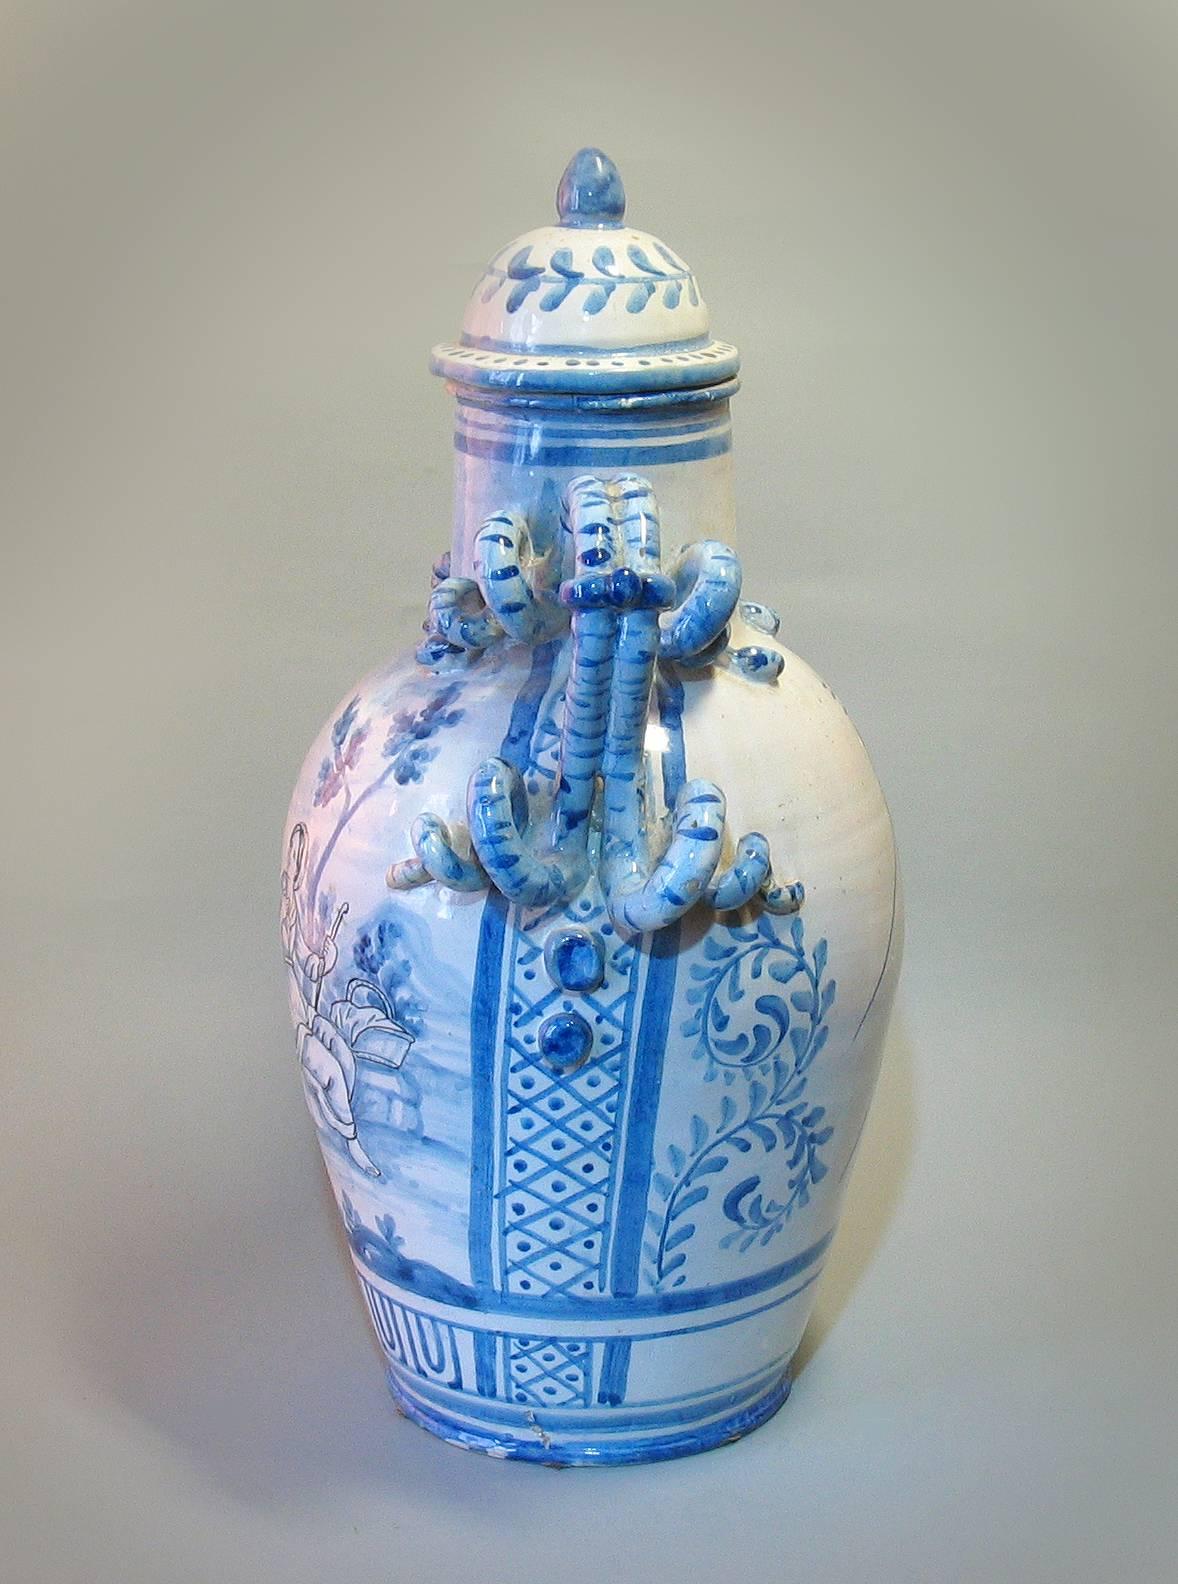 A large Italian blue and white Majolica covered urn/apothecary jar, Savona (Levantino Family), early 19th century, of baluster form with domed lid and twin snake handles on either side, decorated with a pastoral scene on either side and a large